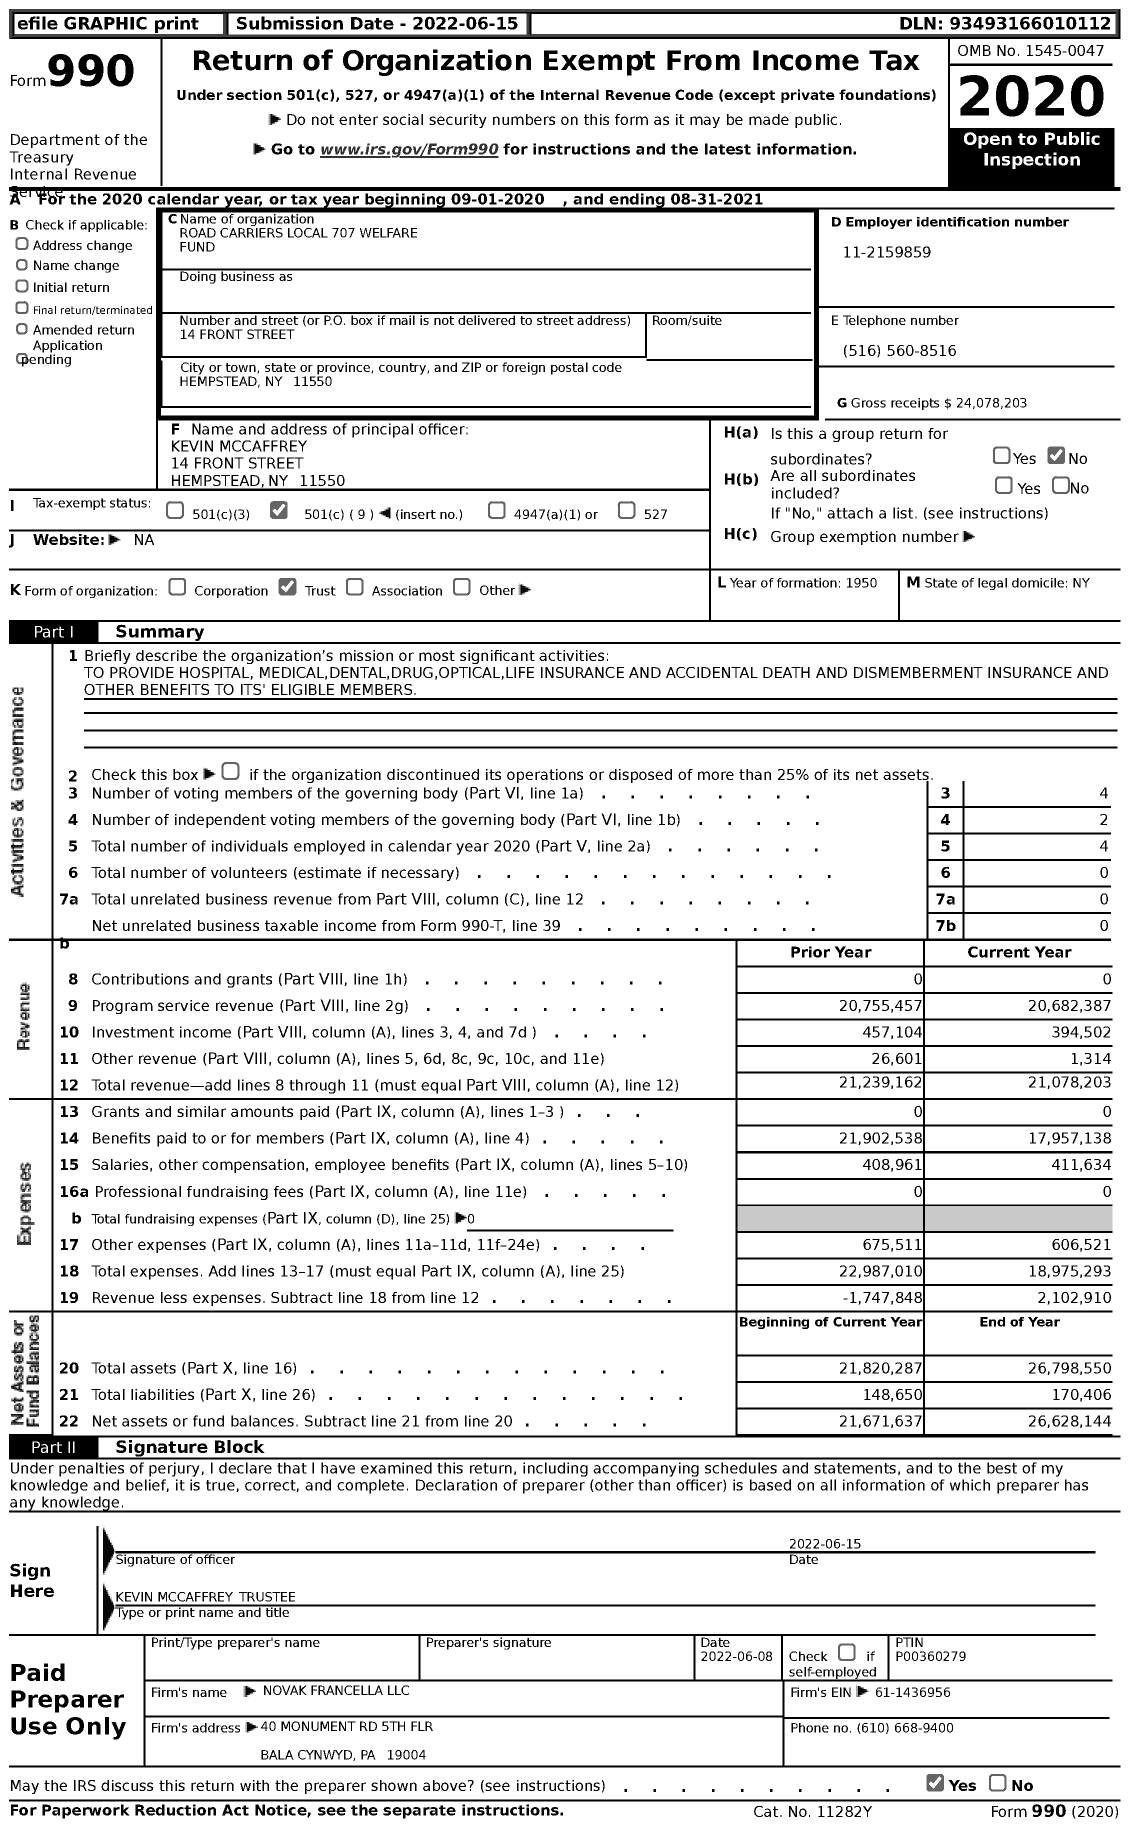 Image of first page of 2020 Form 990 for Road Carriers Local 707 Welfare Fund